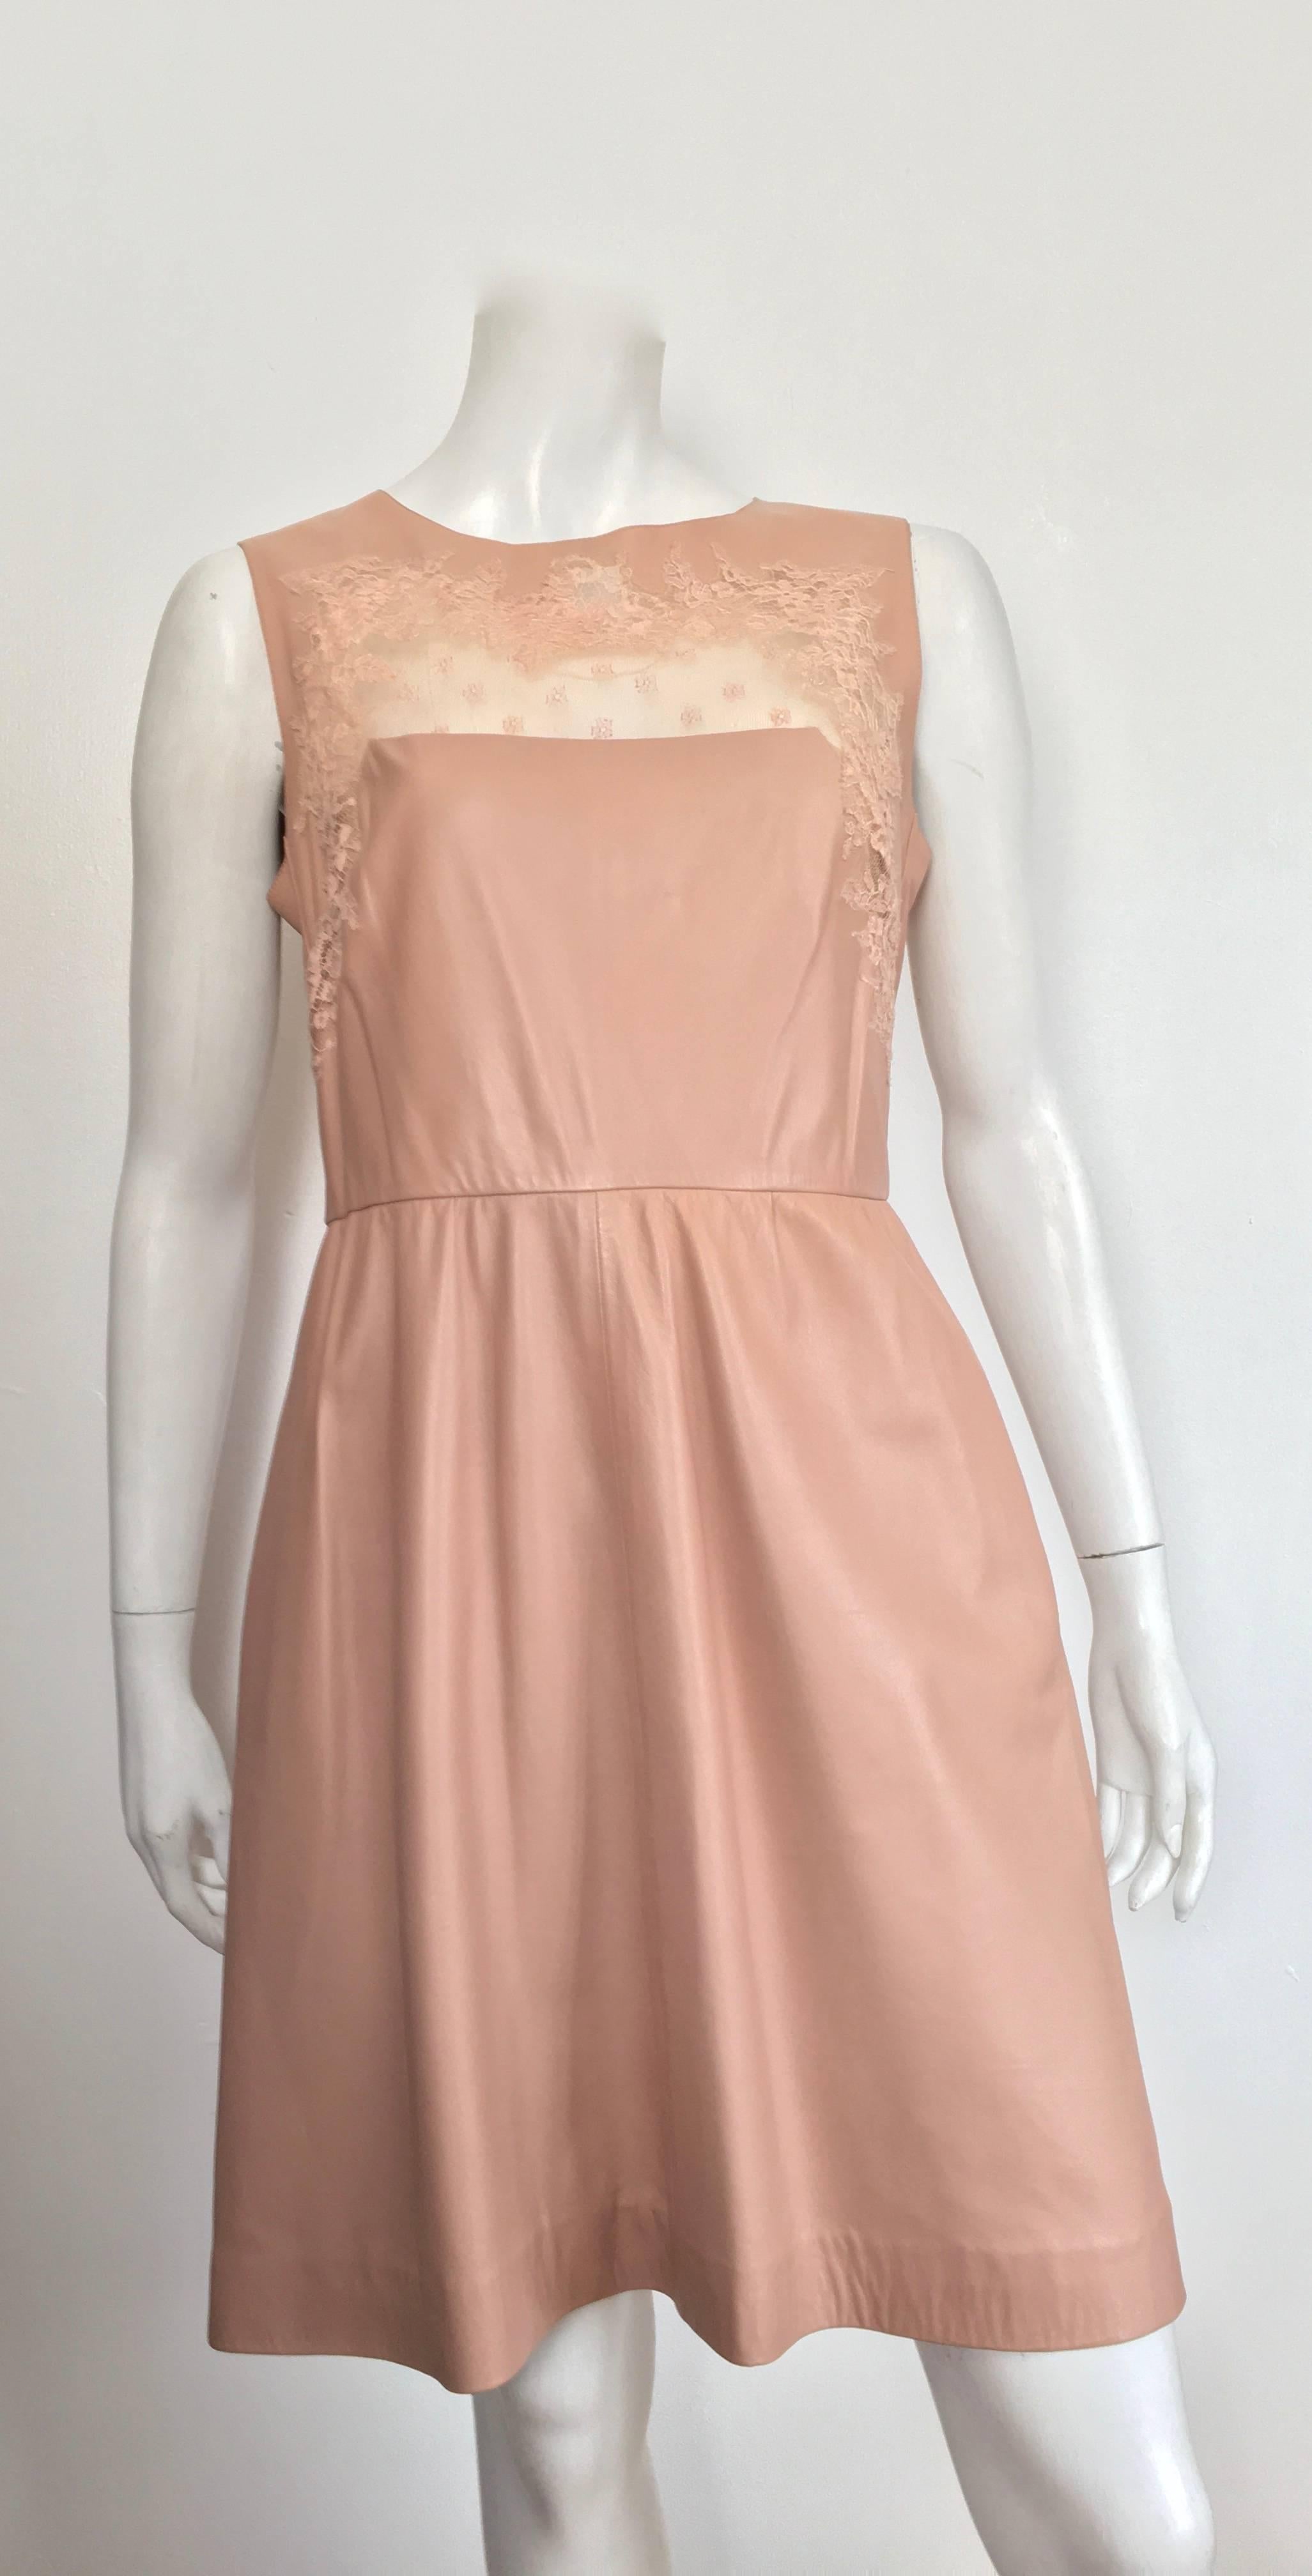 Valentino earth tone color leather with lace around décolletage evening cocktail sleeveless dress with pockets is a size 8.  Every stitch of this dress is meticulously thought out, it is impeccable. Dress is lined. Whether you are attending the